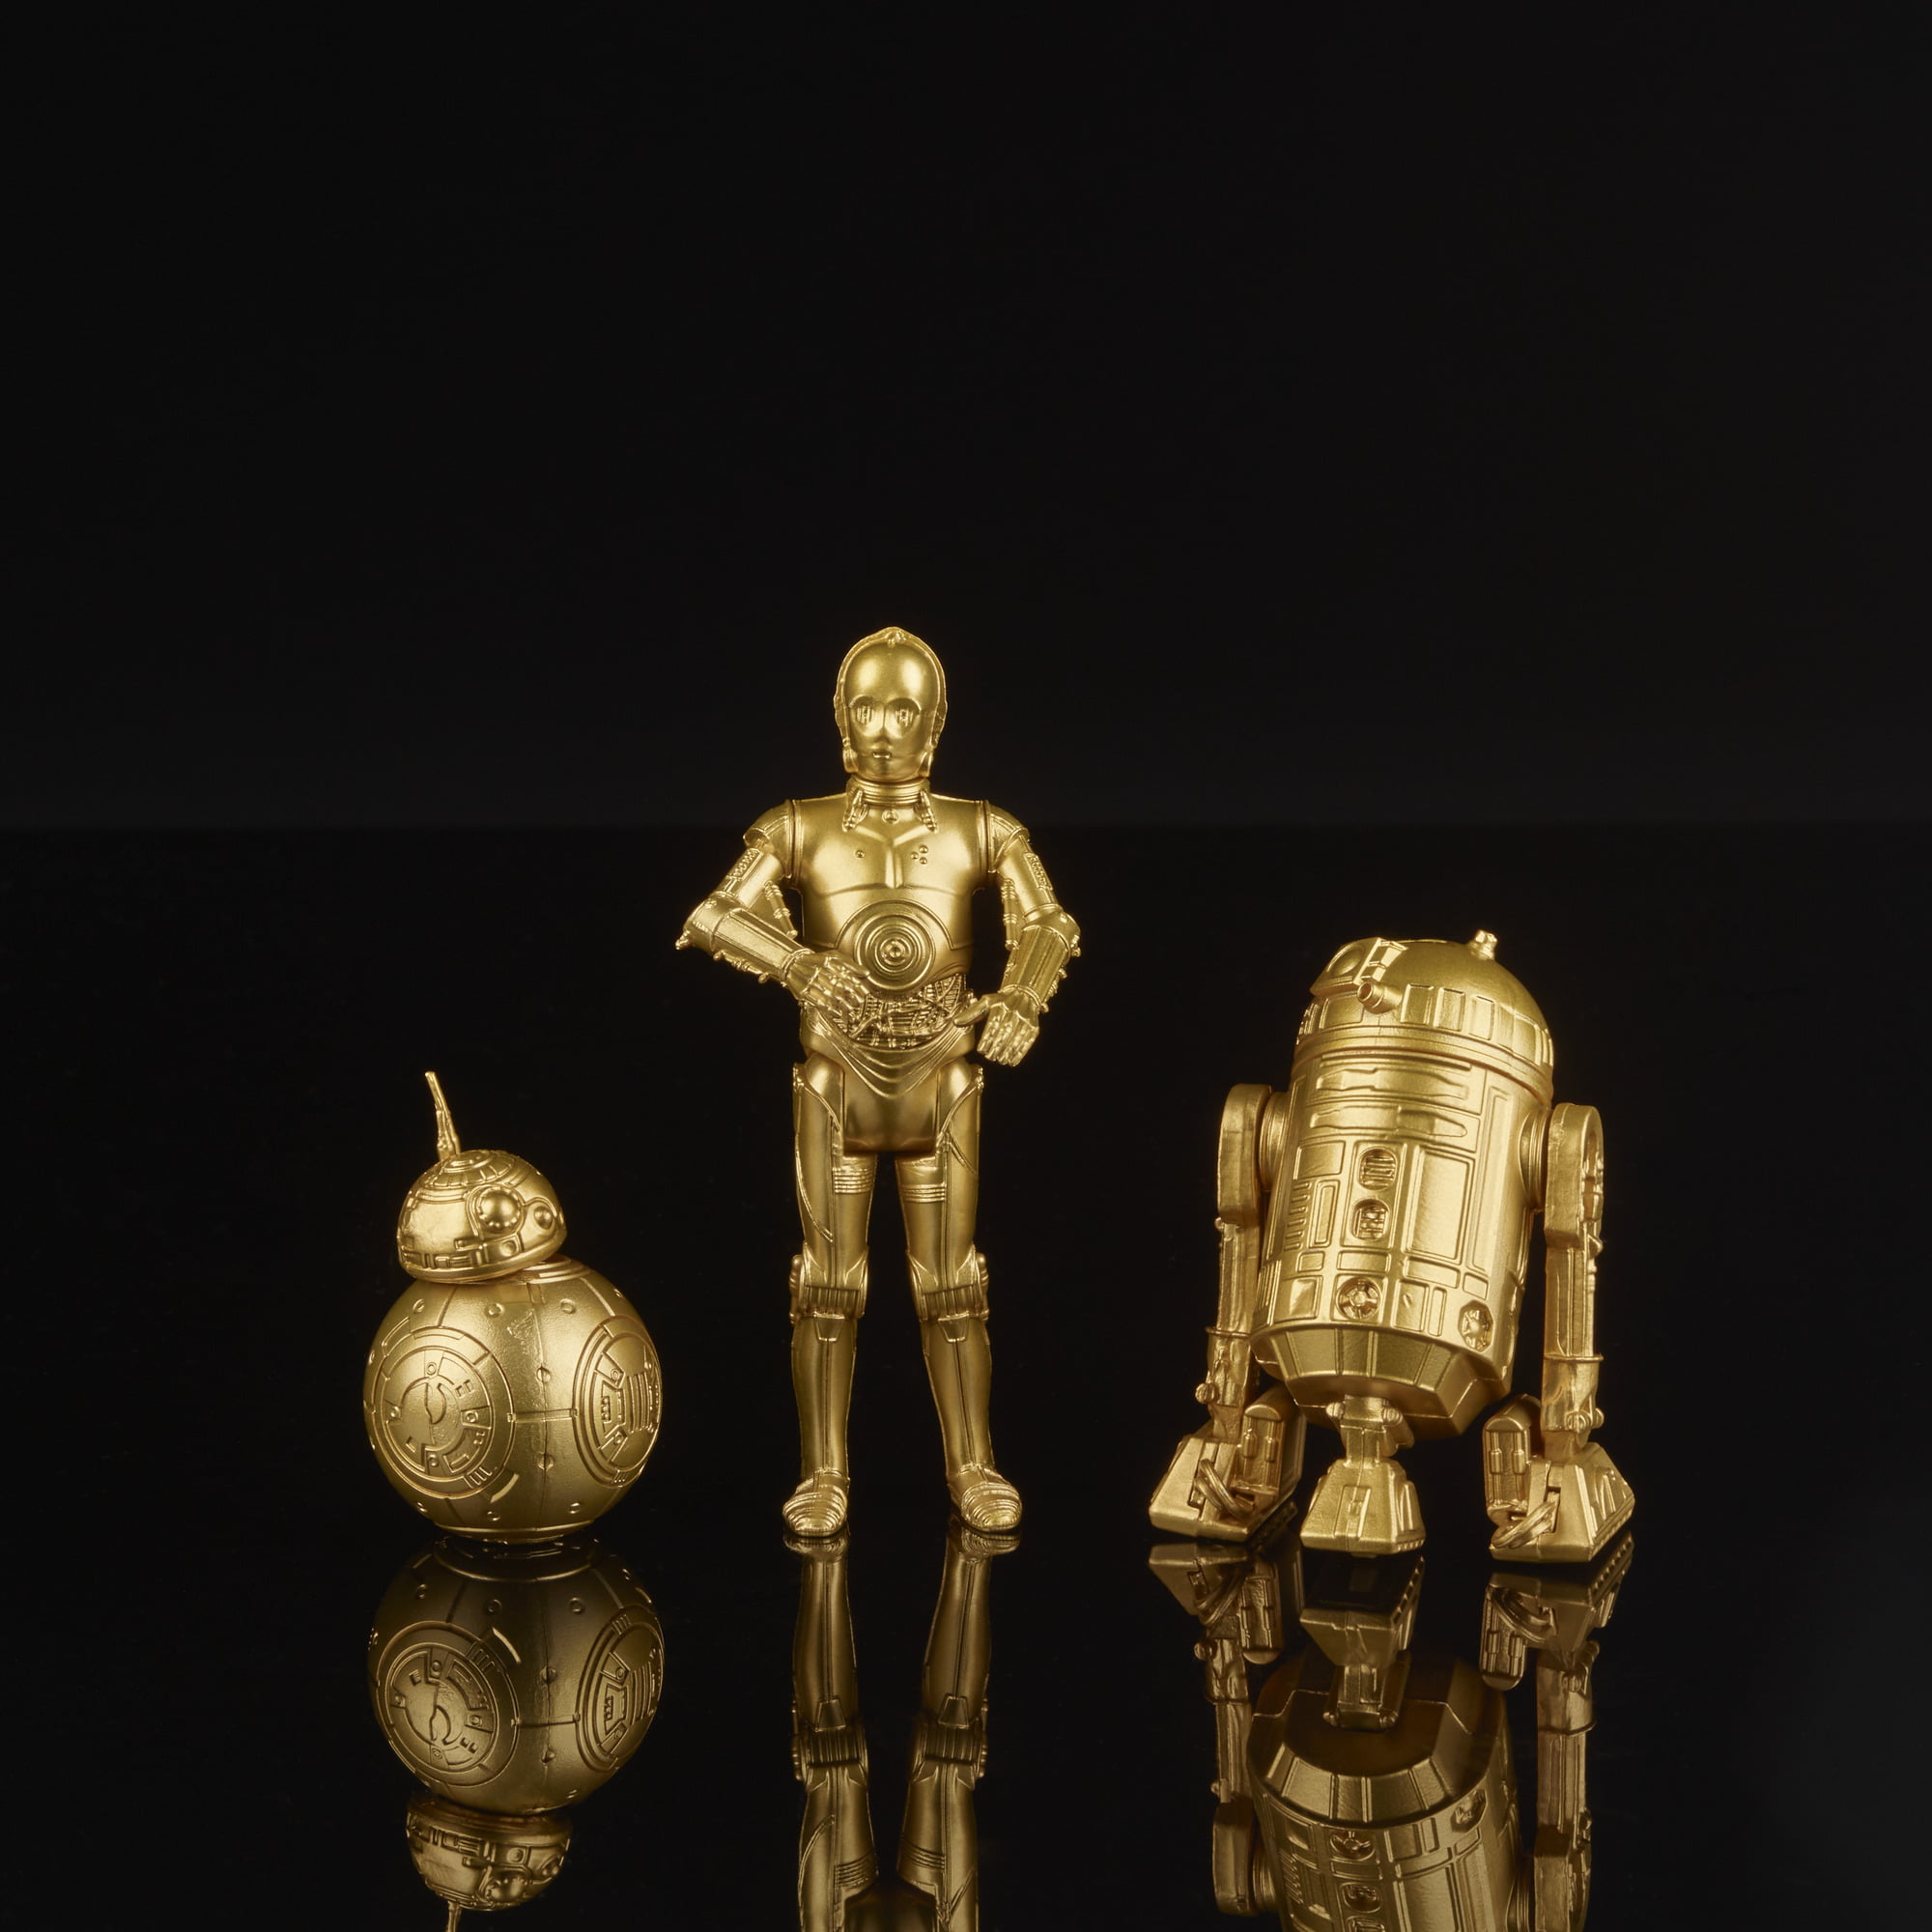 STAR WARS 3 PACK C-3PO BB-8 R2-D2 Gold commemorative Walmart EXCLUSIVE edition 